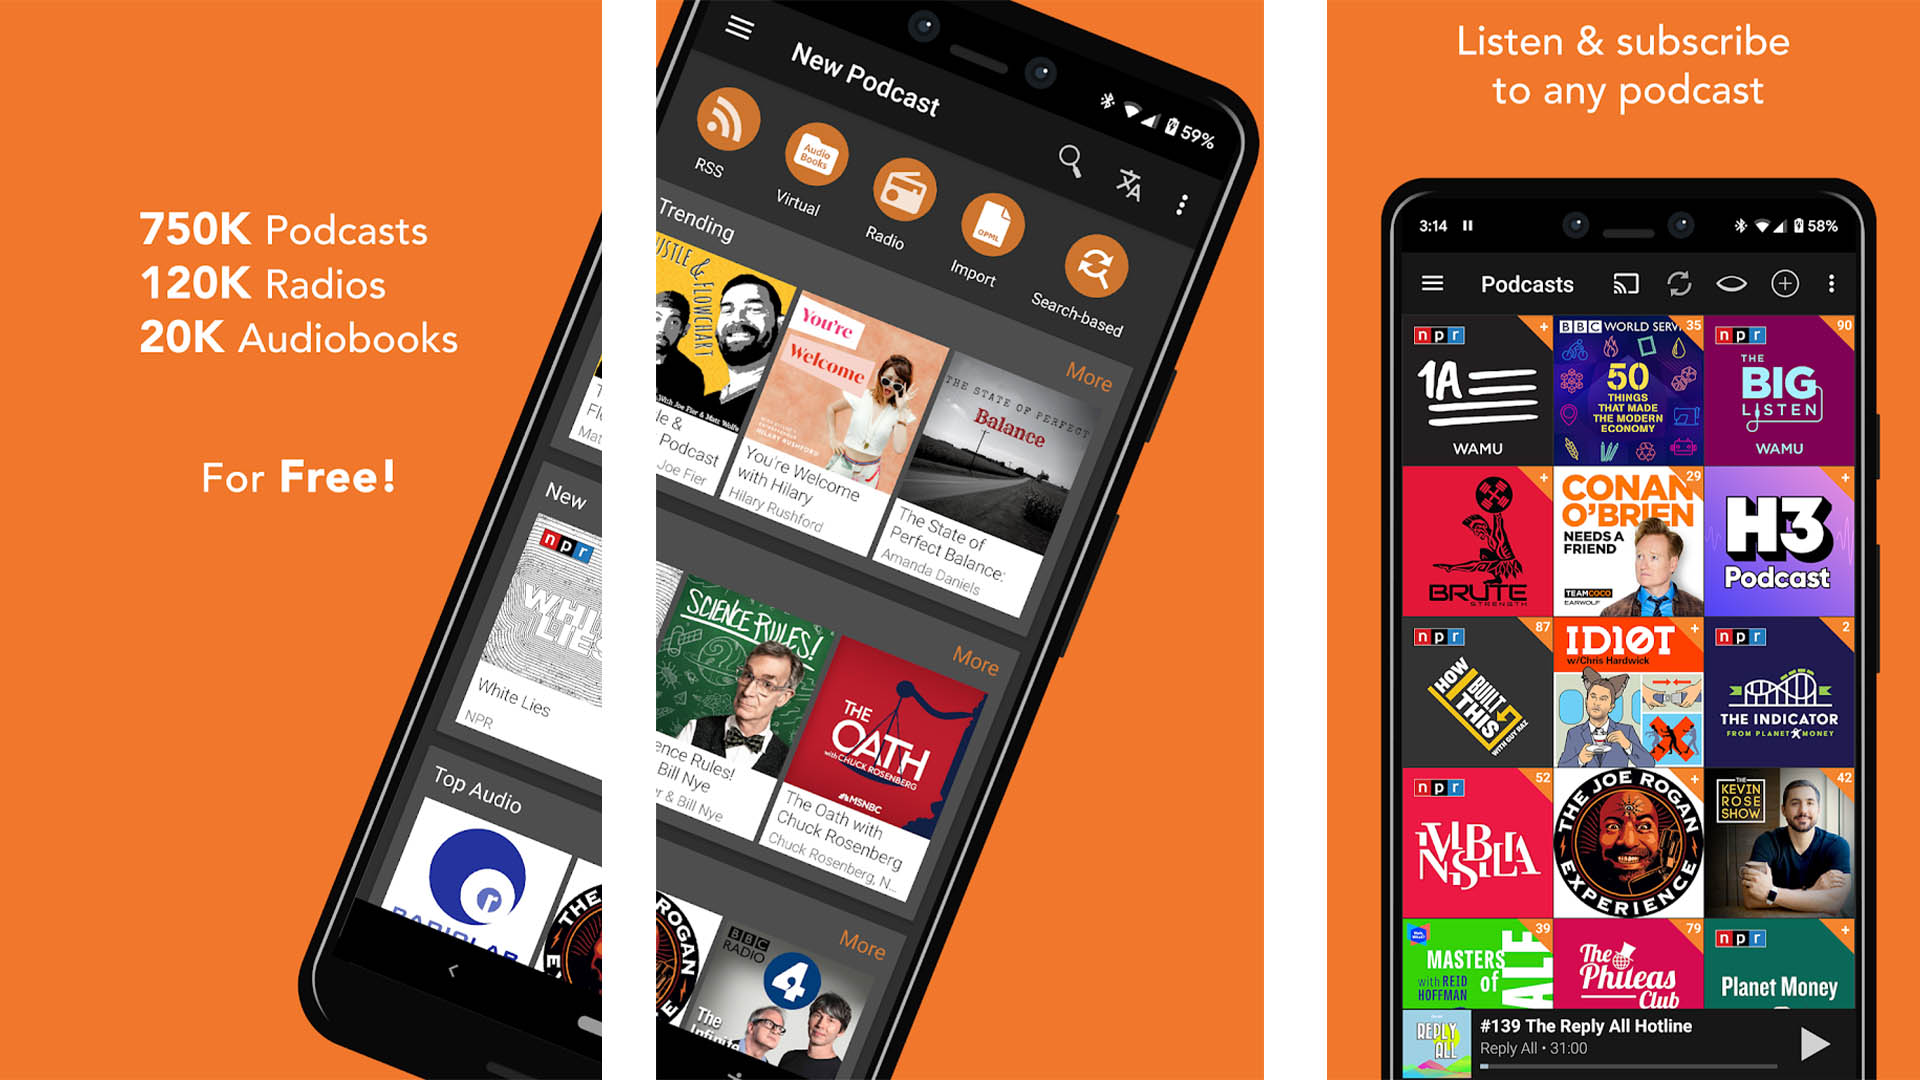 Podcast Addict is one of the best podcast apps